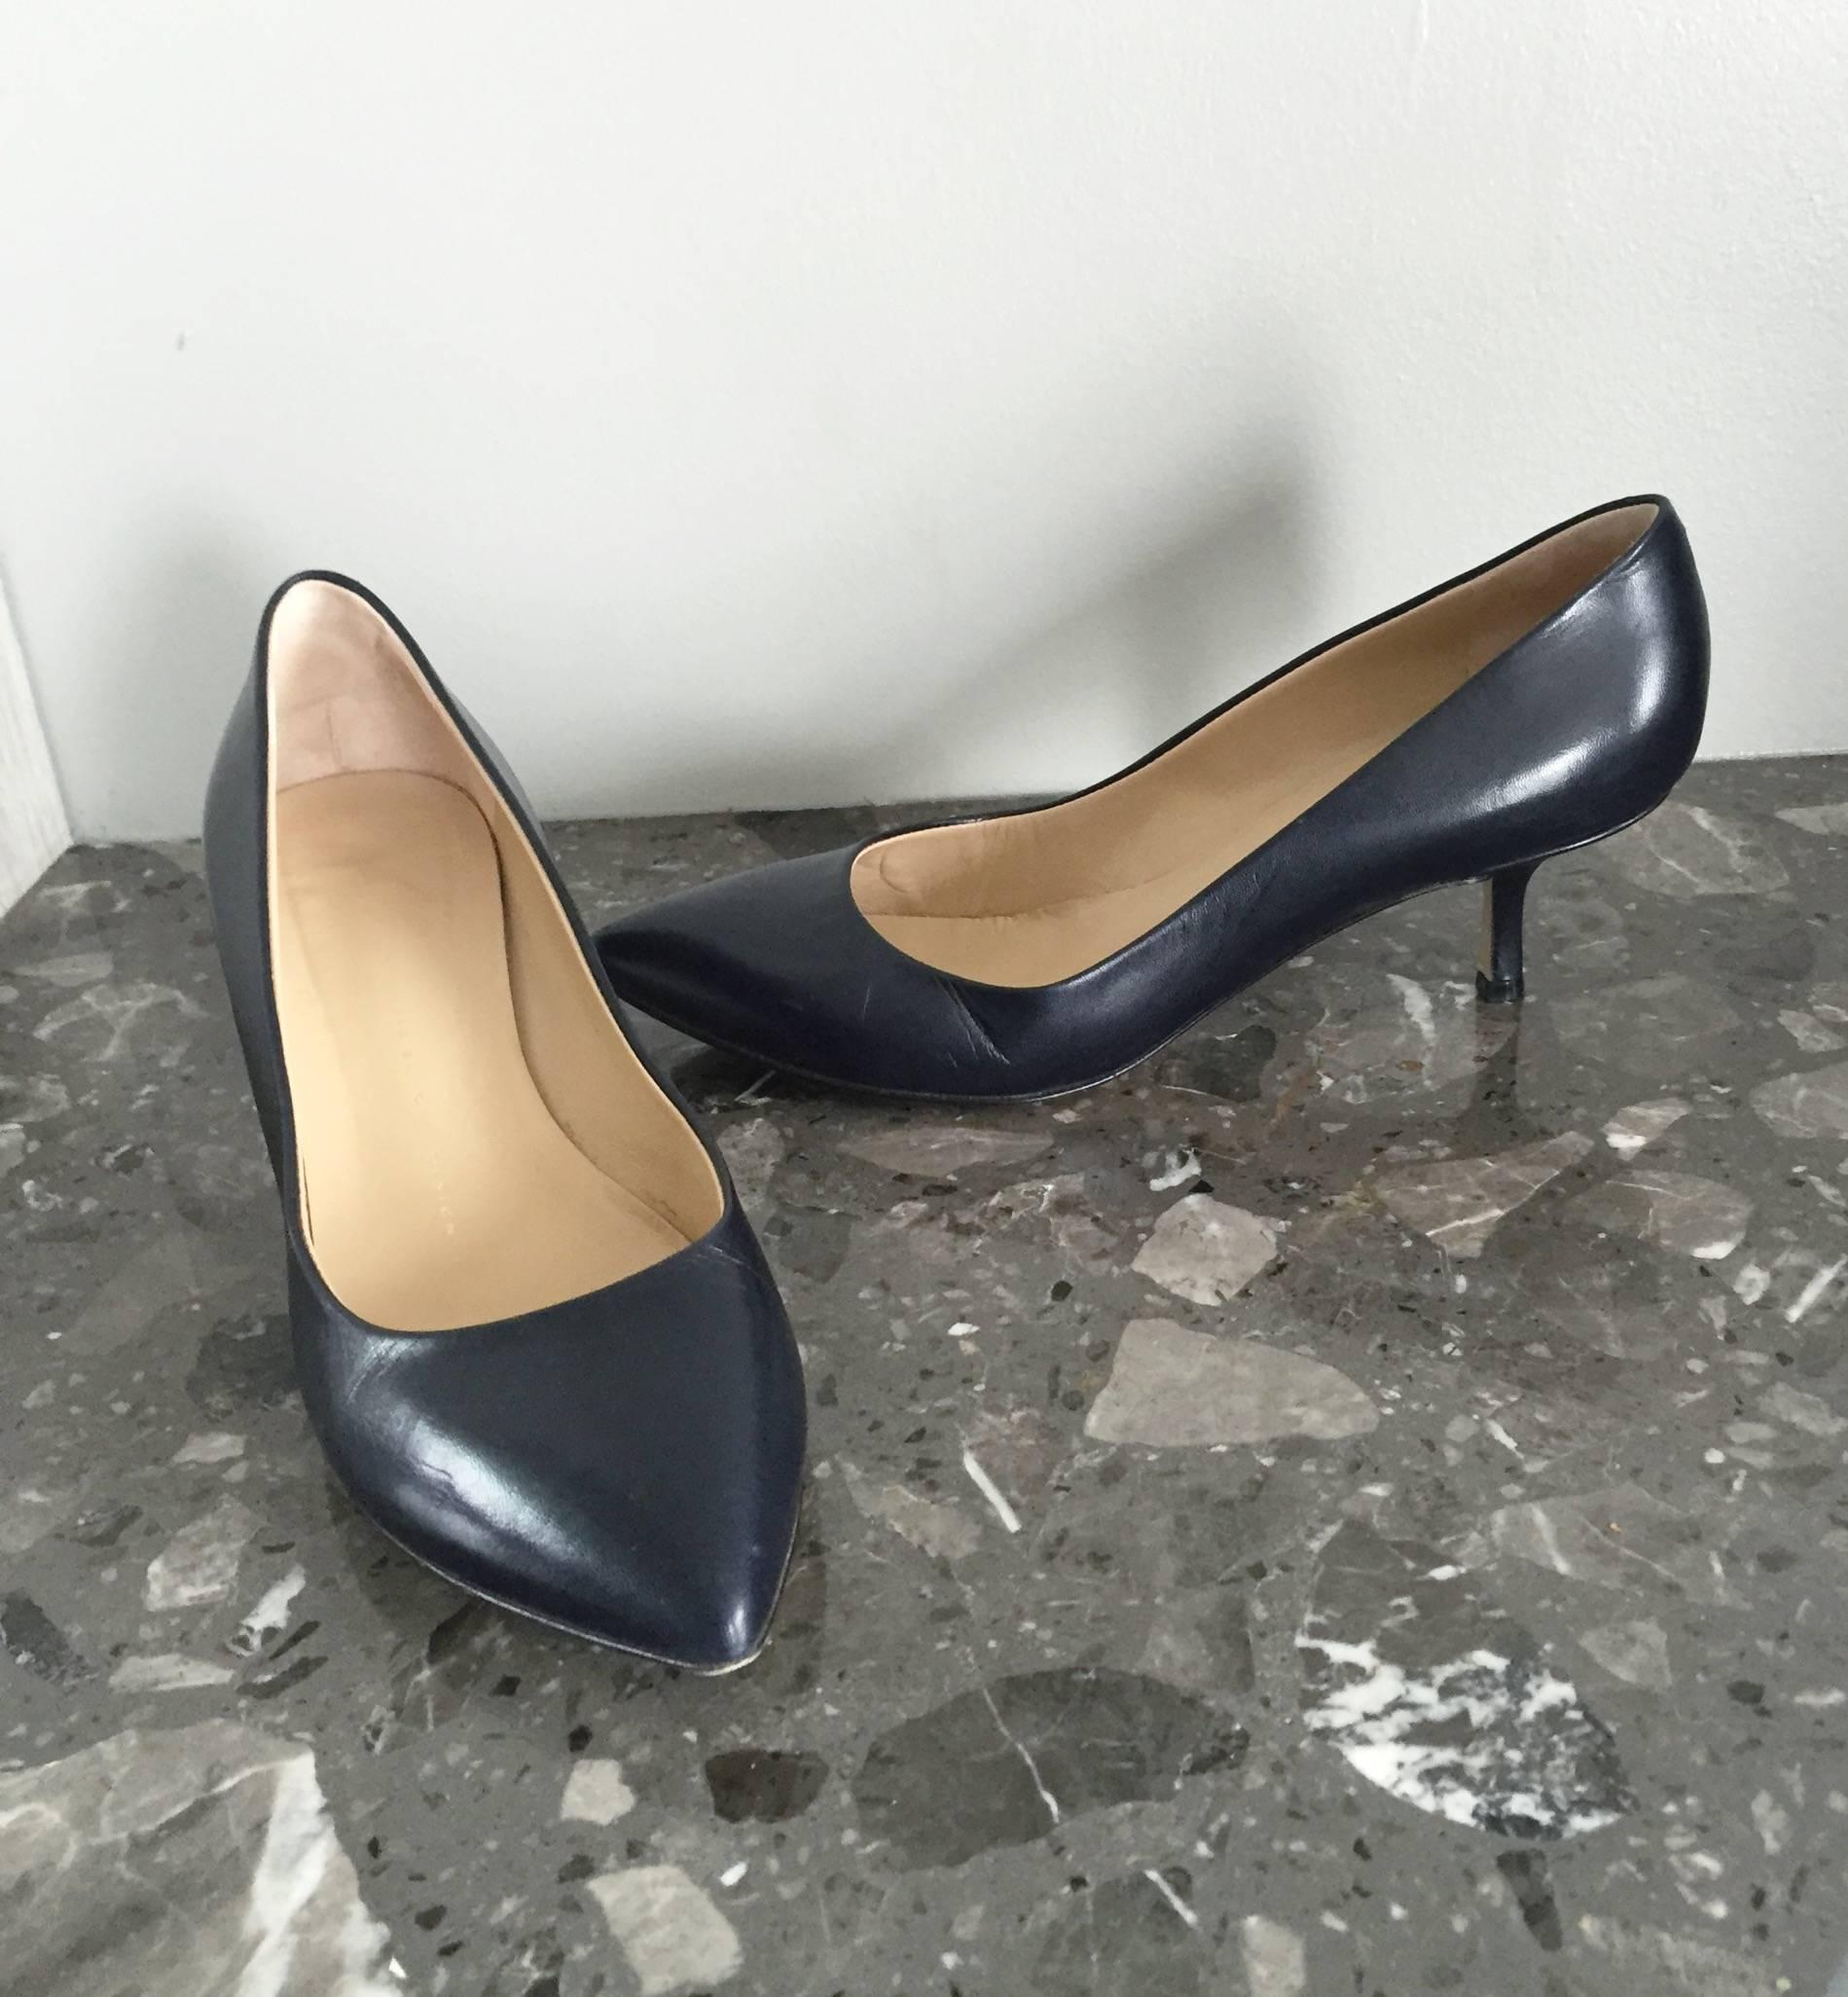 Beautiful Gisueppe Zanotti navy blue / midnight blue leather kitten heel pumps! We all know how hard navy blue pumps are to find, and these are simply wonderful! Great with jeans, yet great with a dress, suit, skirt, or trousers. Made in Italy. Worn